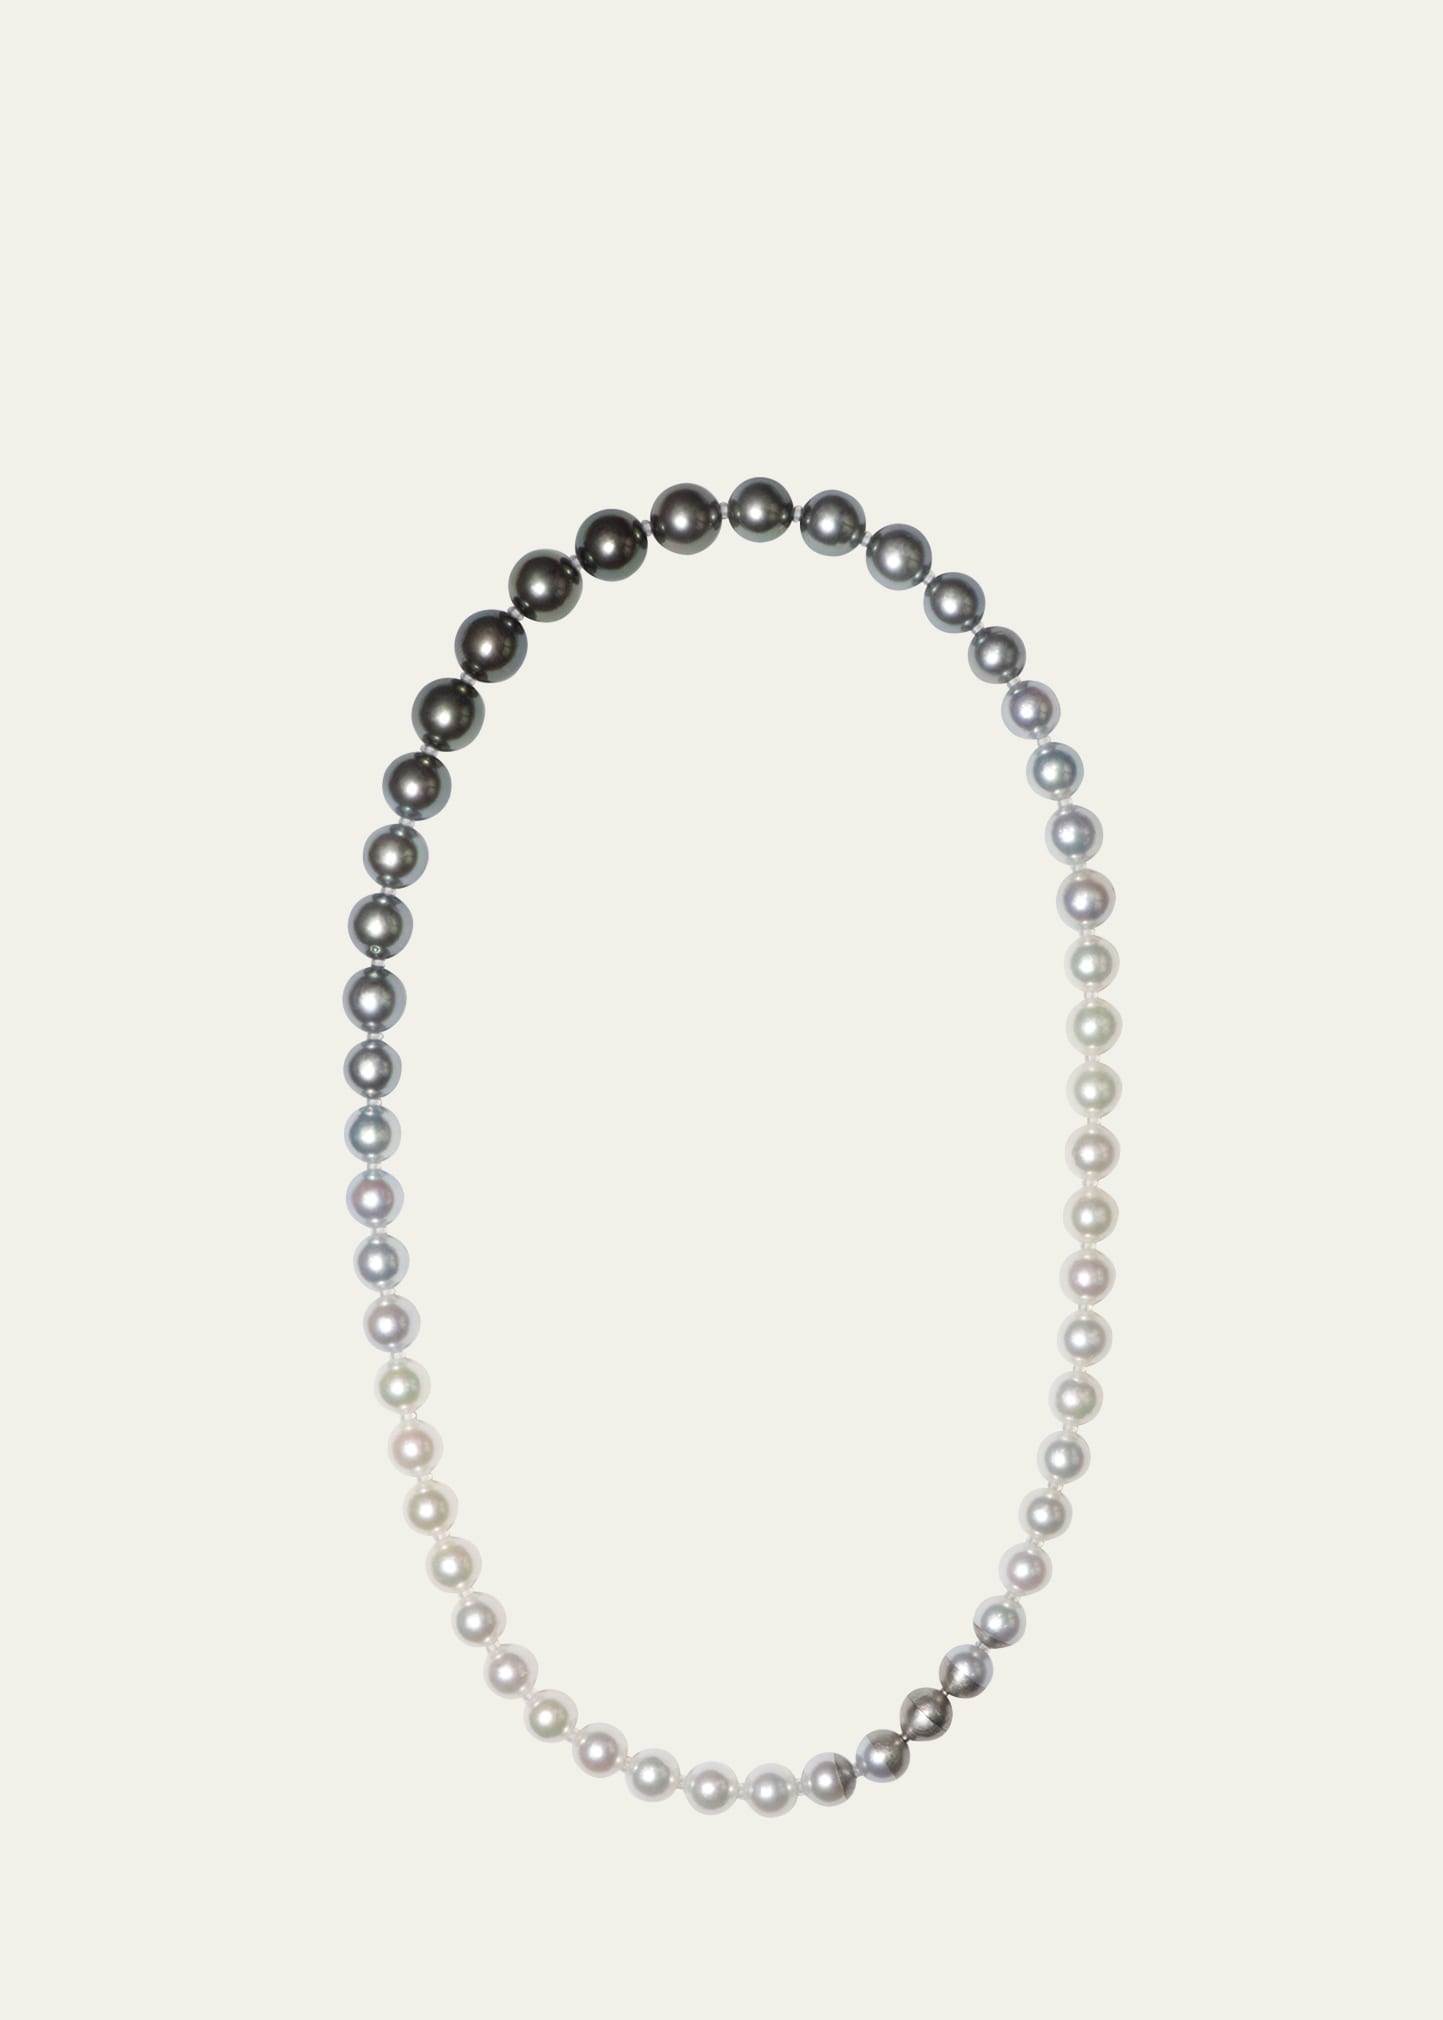 Yutai Platinum Sectional Pearl Necklace With Black Pearls And Cultured Akoya Pearls In Gray